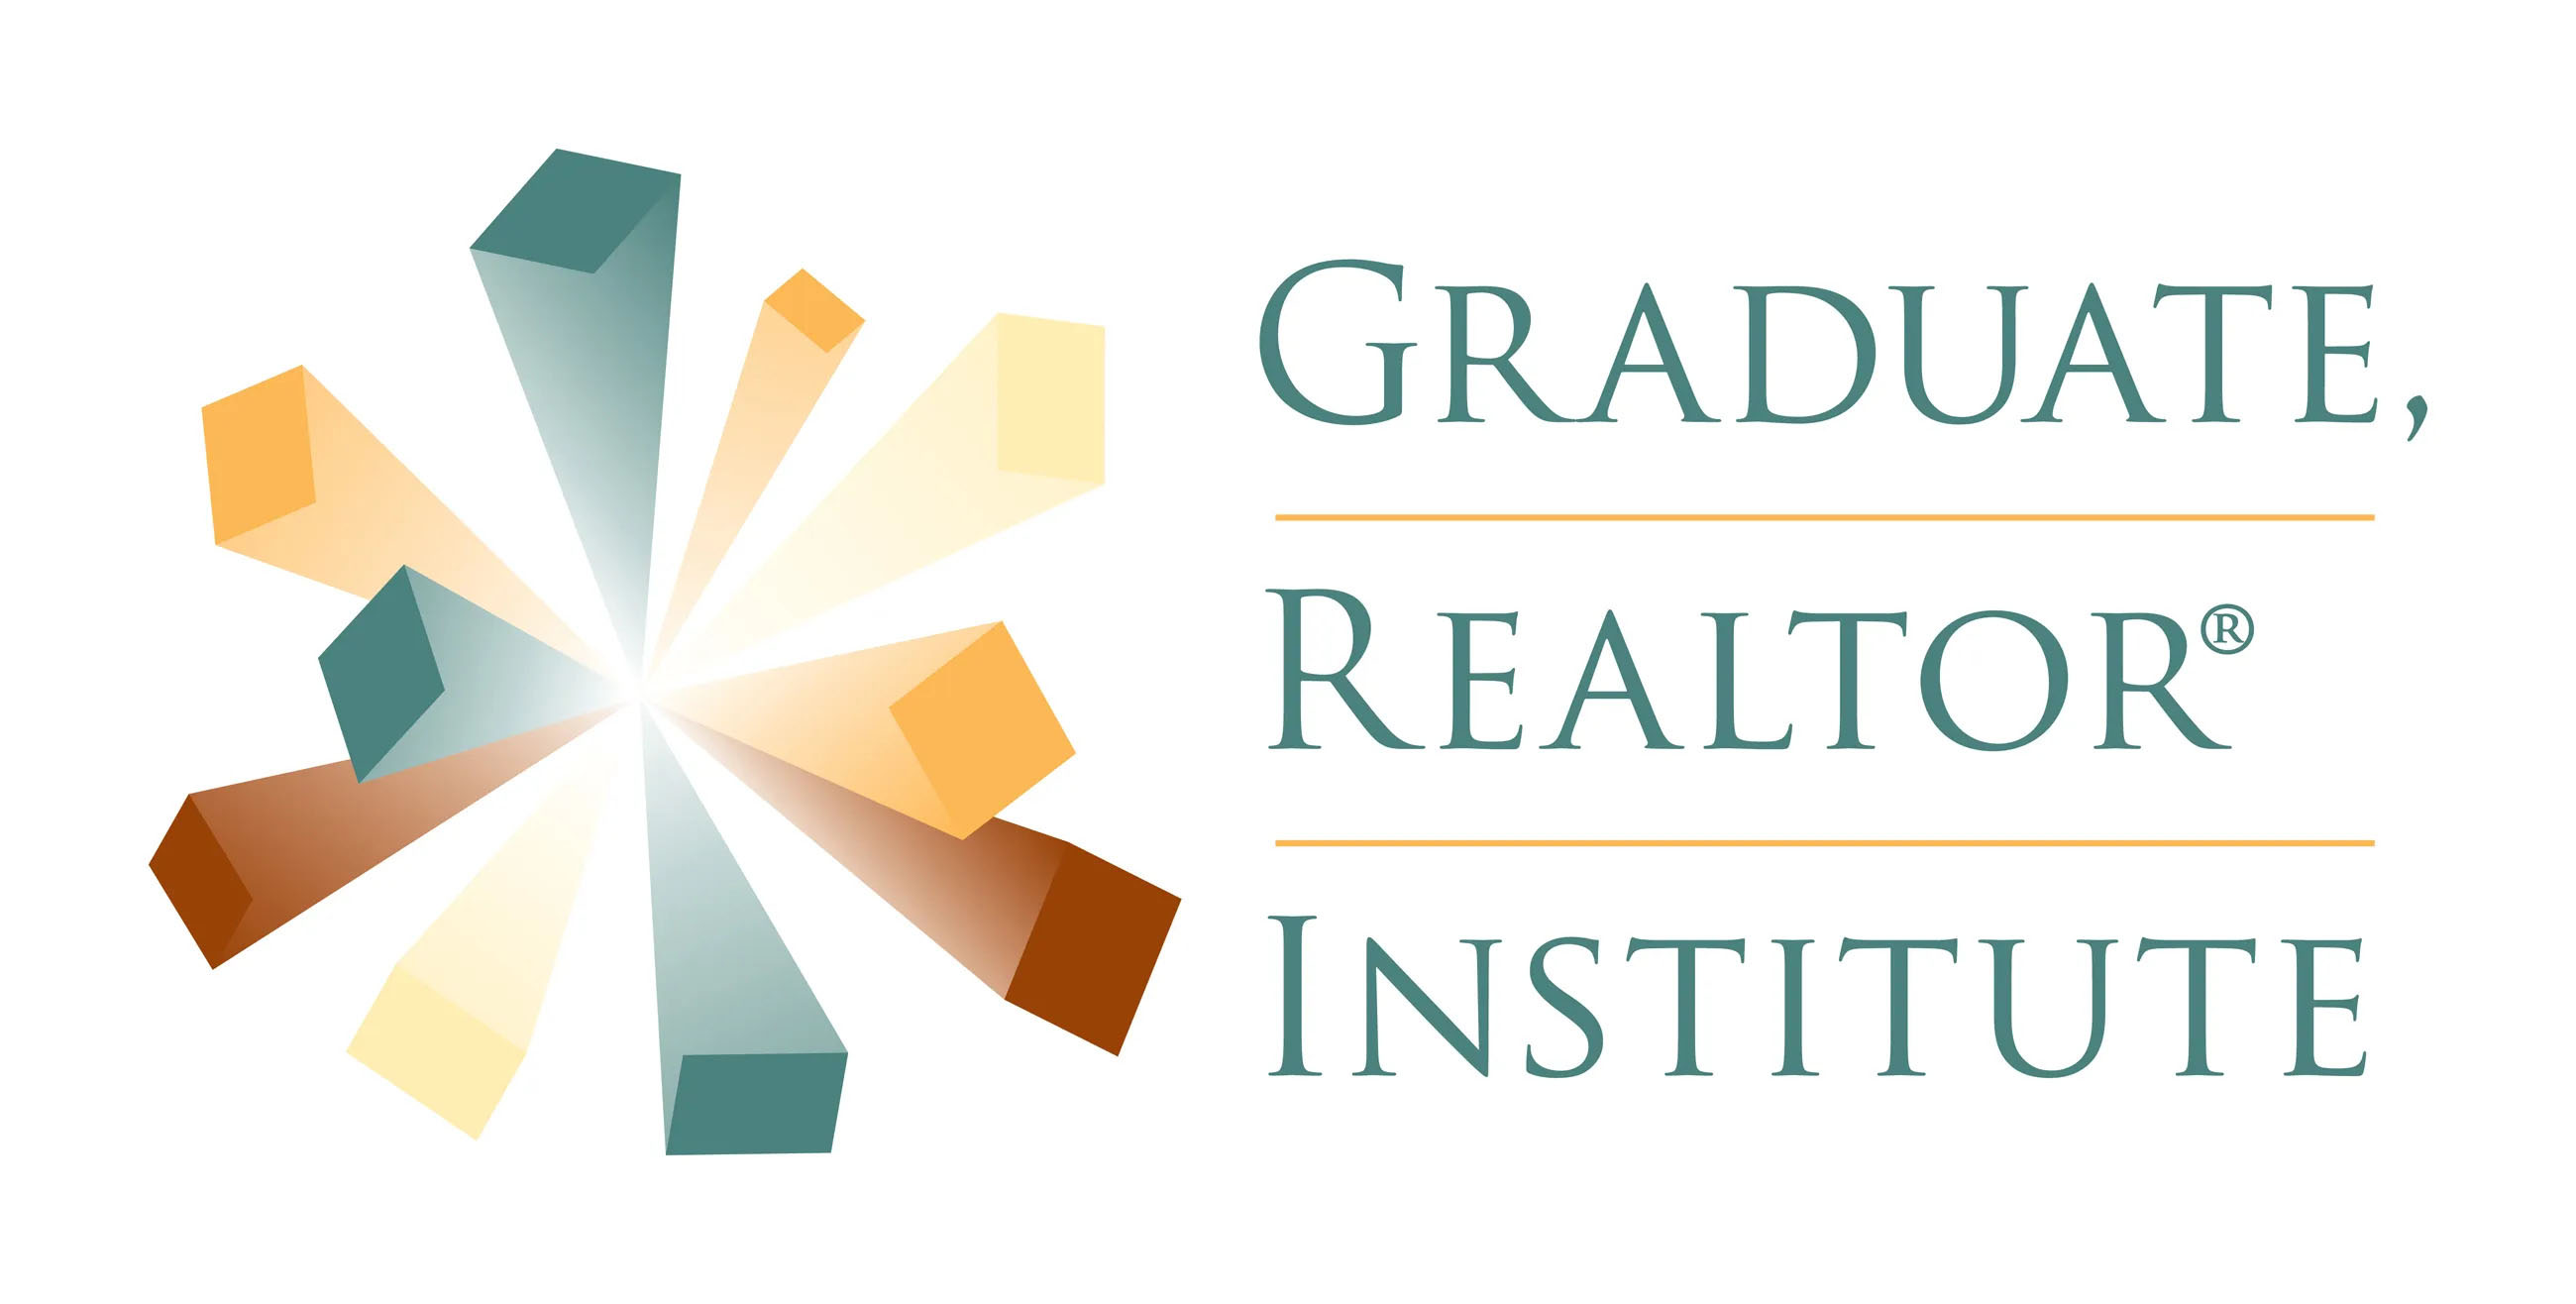 A text banner for the Graduate Institute